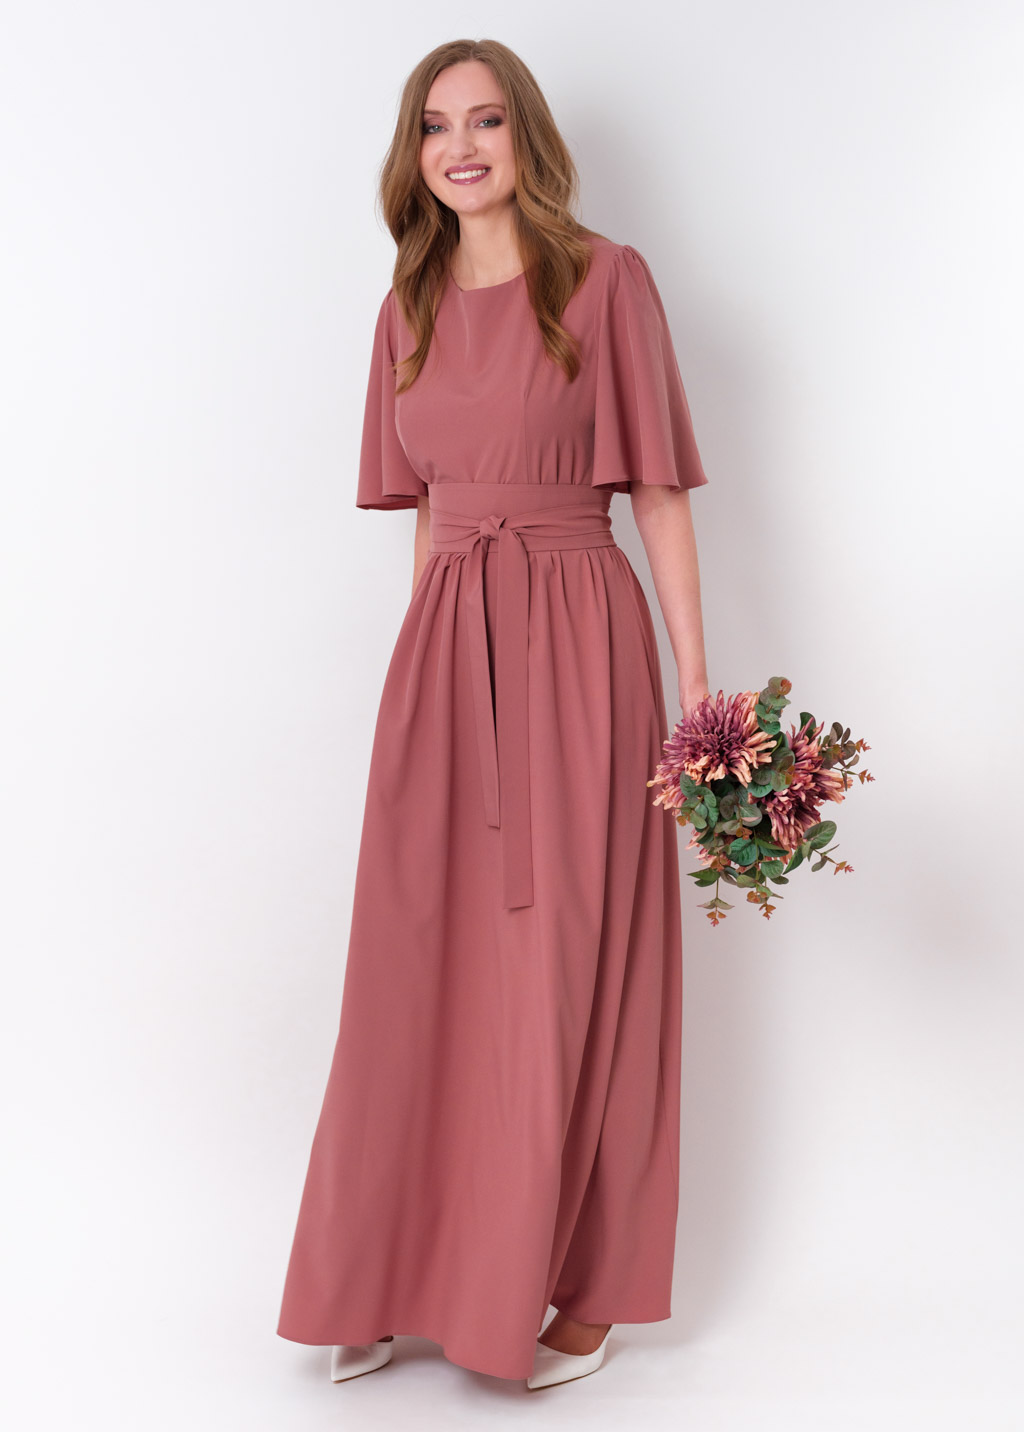 Rosewood long dress with belt